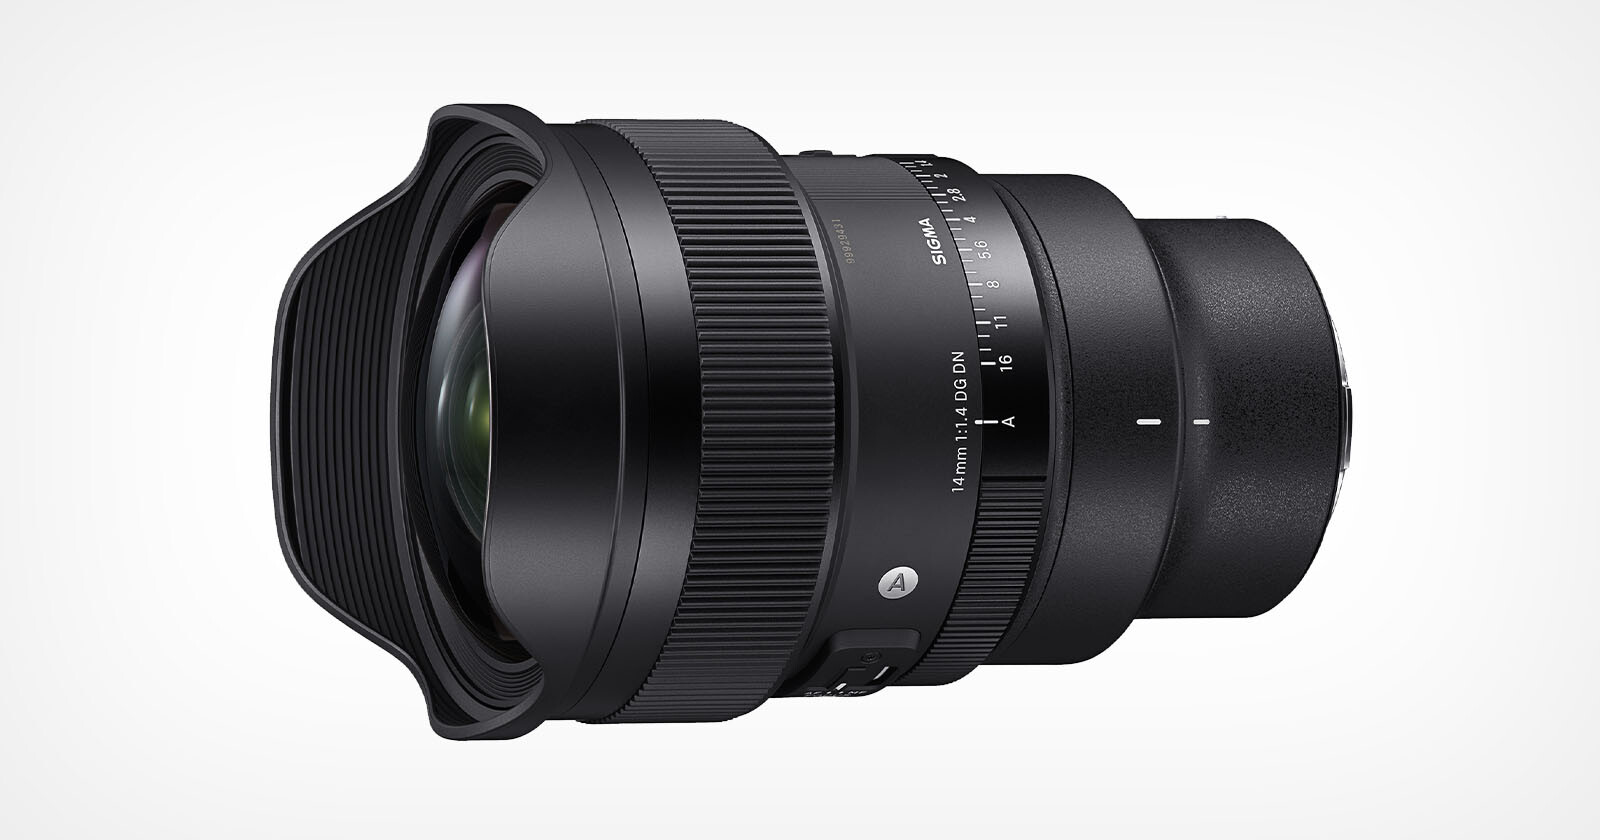  sigma 14mm art lens tailor-made astrophotography 